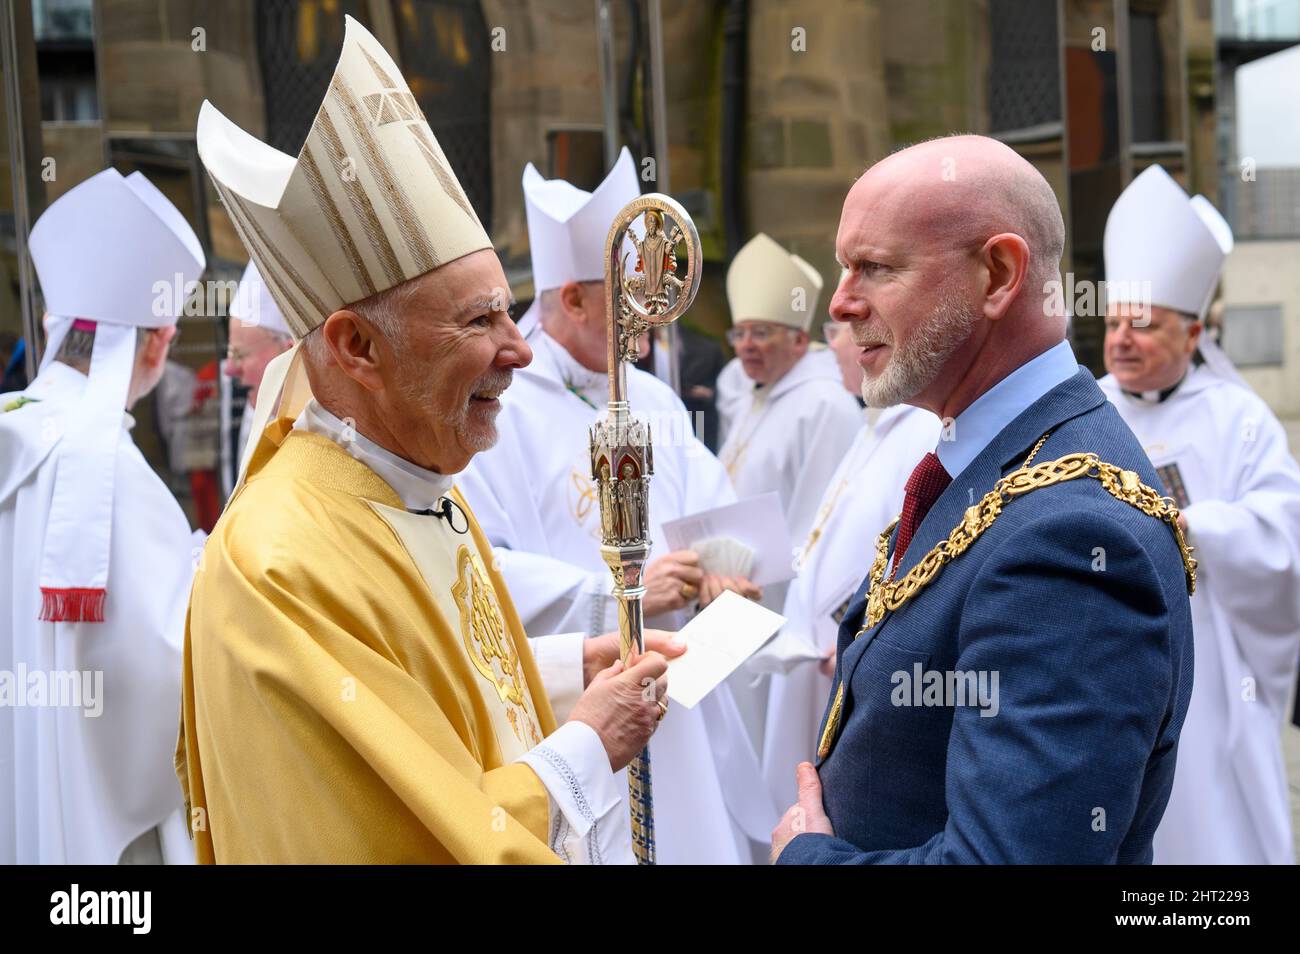 The Most Reverend William Nolan, with the Lord Provost of Glasgow, Philip  Braat, after he was installed as the new Roman Catholic Archbishop of  Glasgow during his enthronement ceremony at St Andrew's